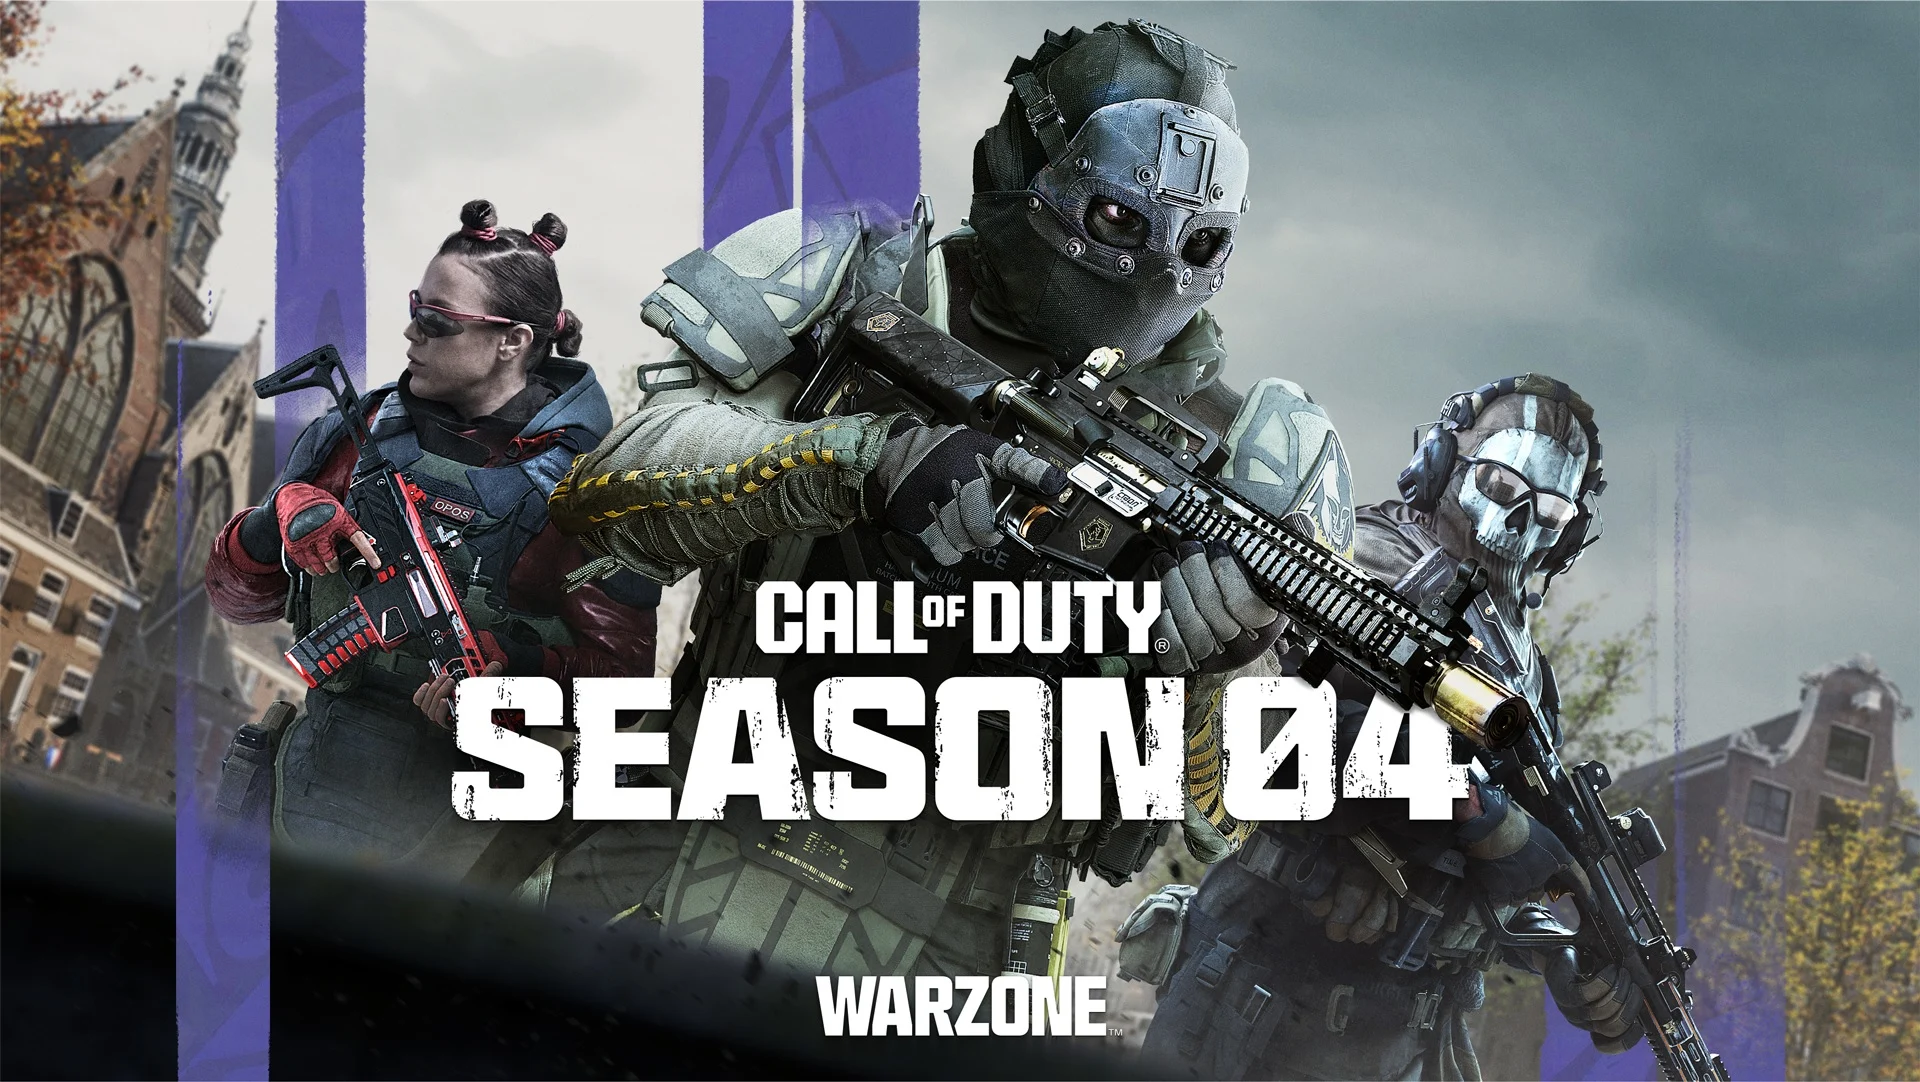 Activision presents Season 4 in Call of Duty: Modern Warfare II and Warzone 2